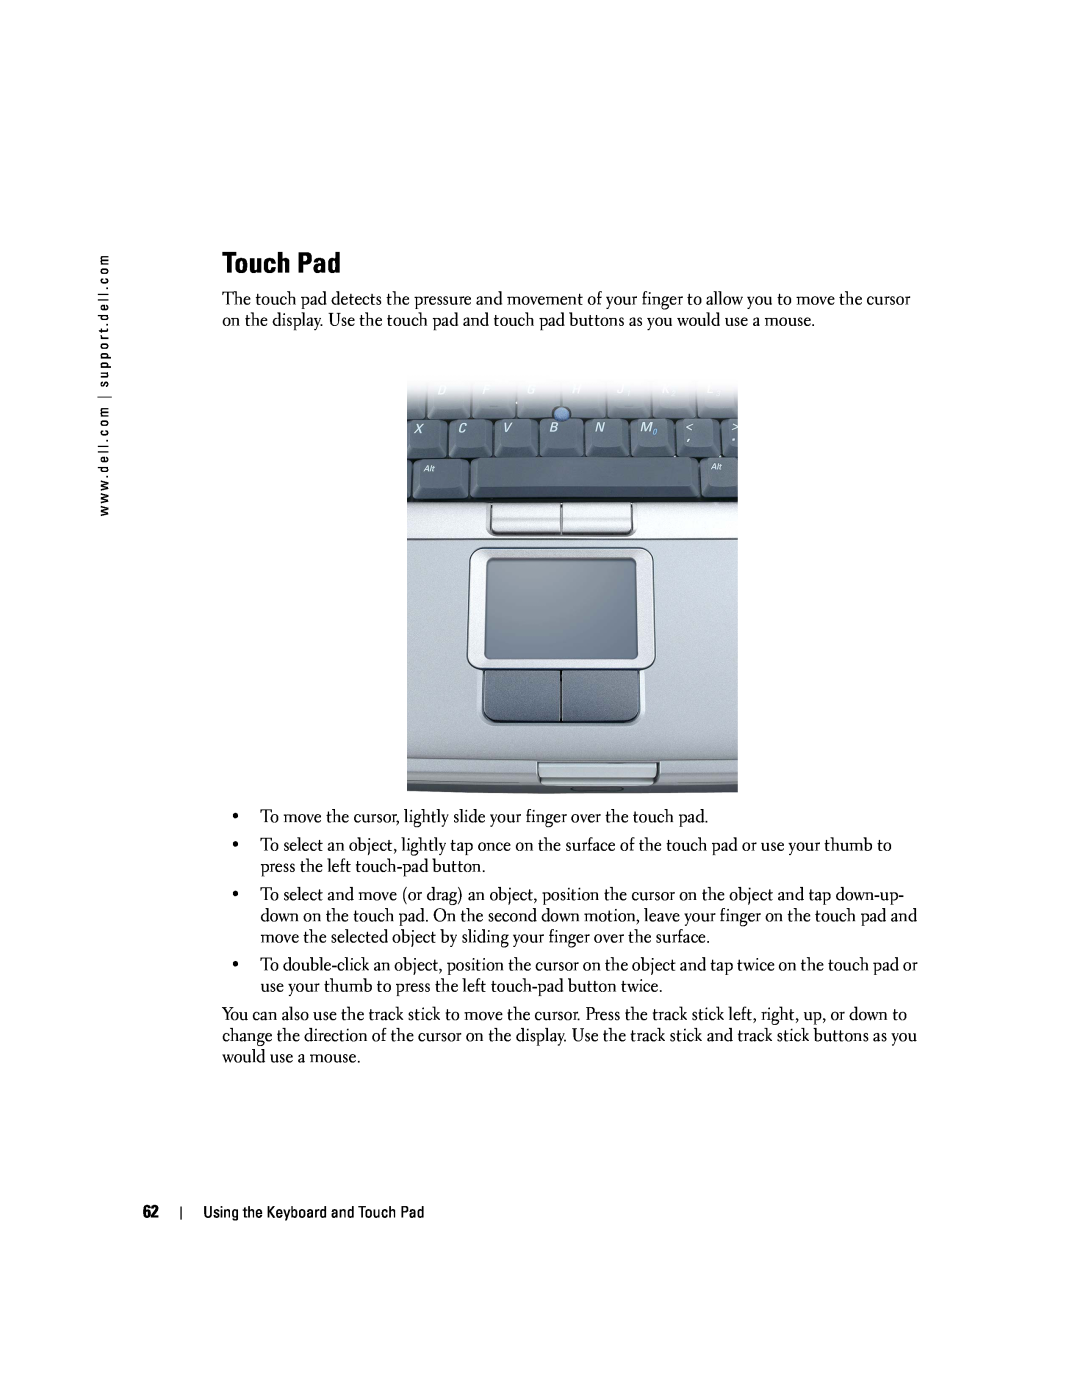 Dell PP09L owner manual Touch Pad 